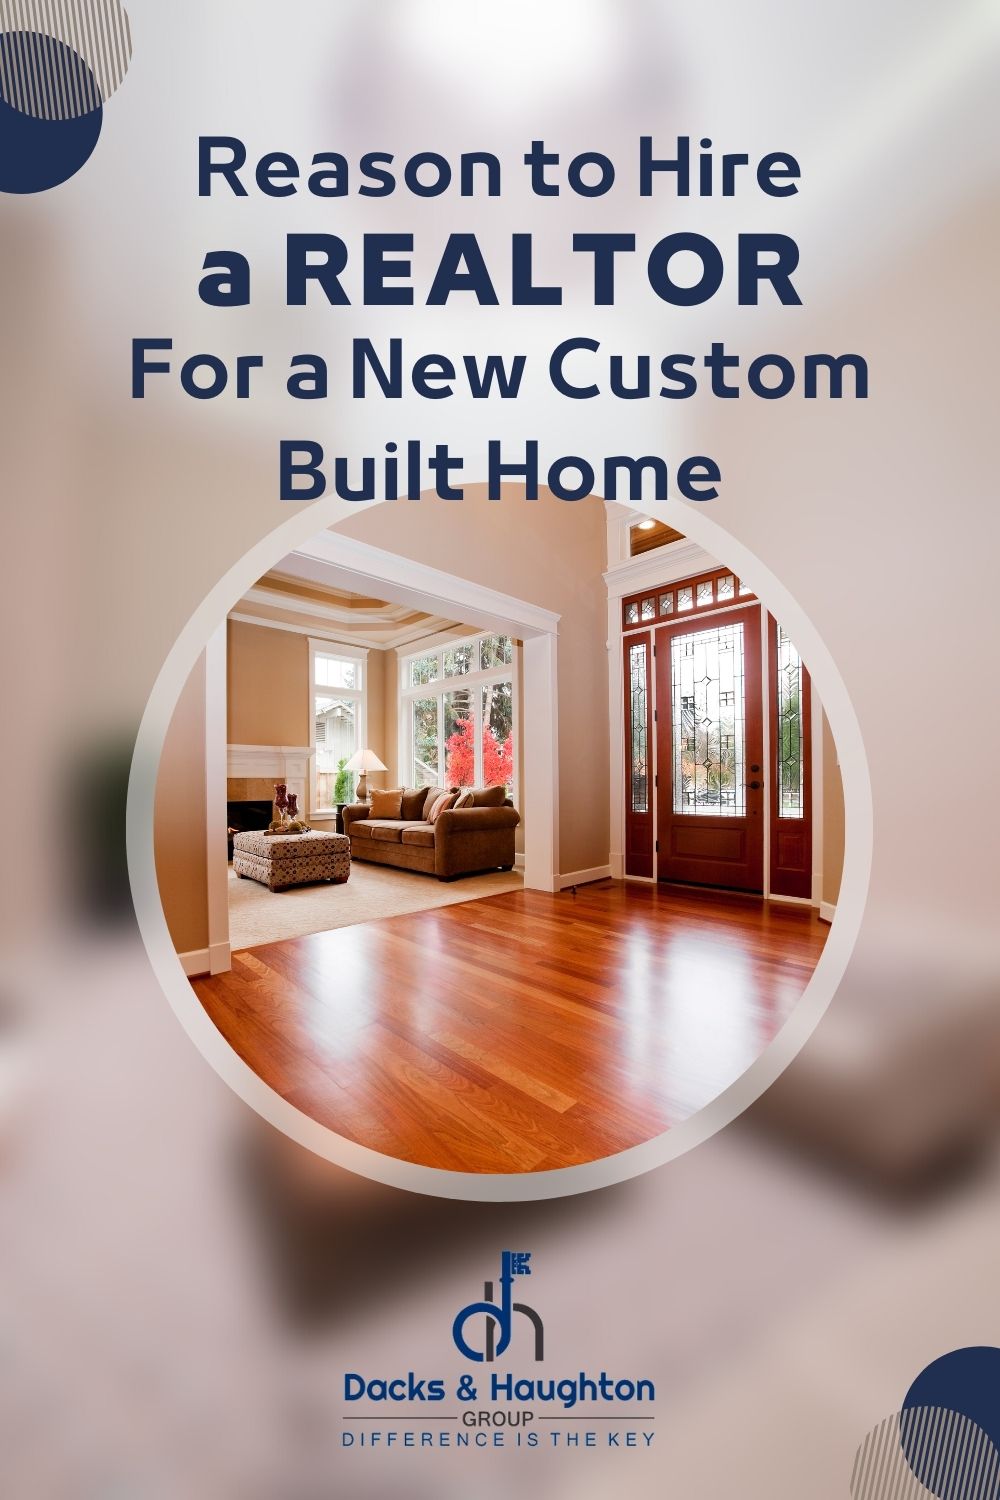 Reasons to Hire a Realtor When Building a new home